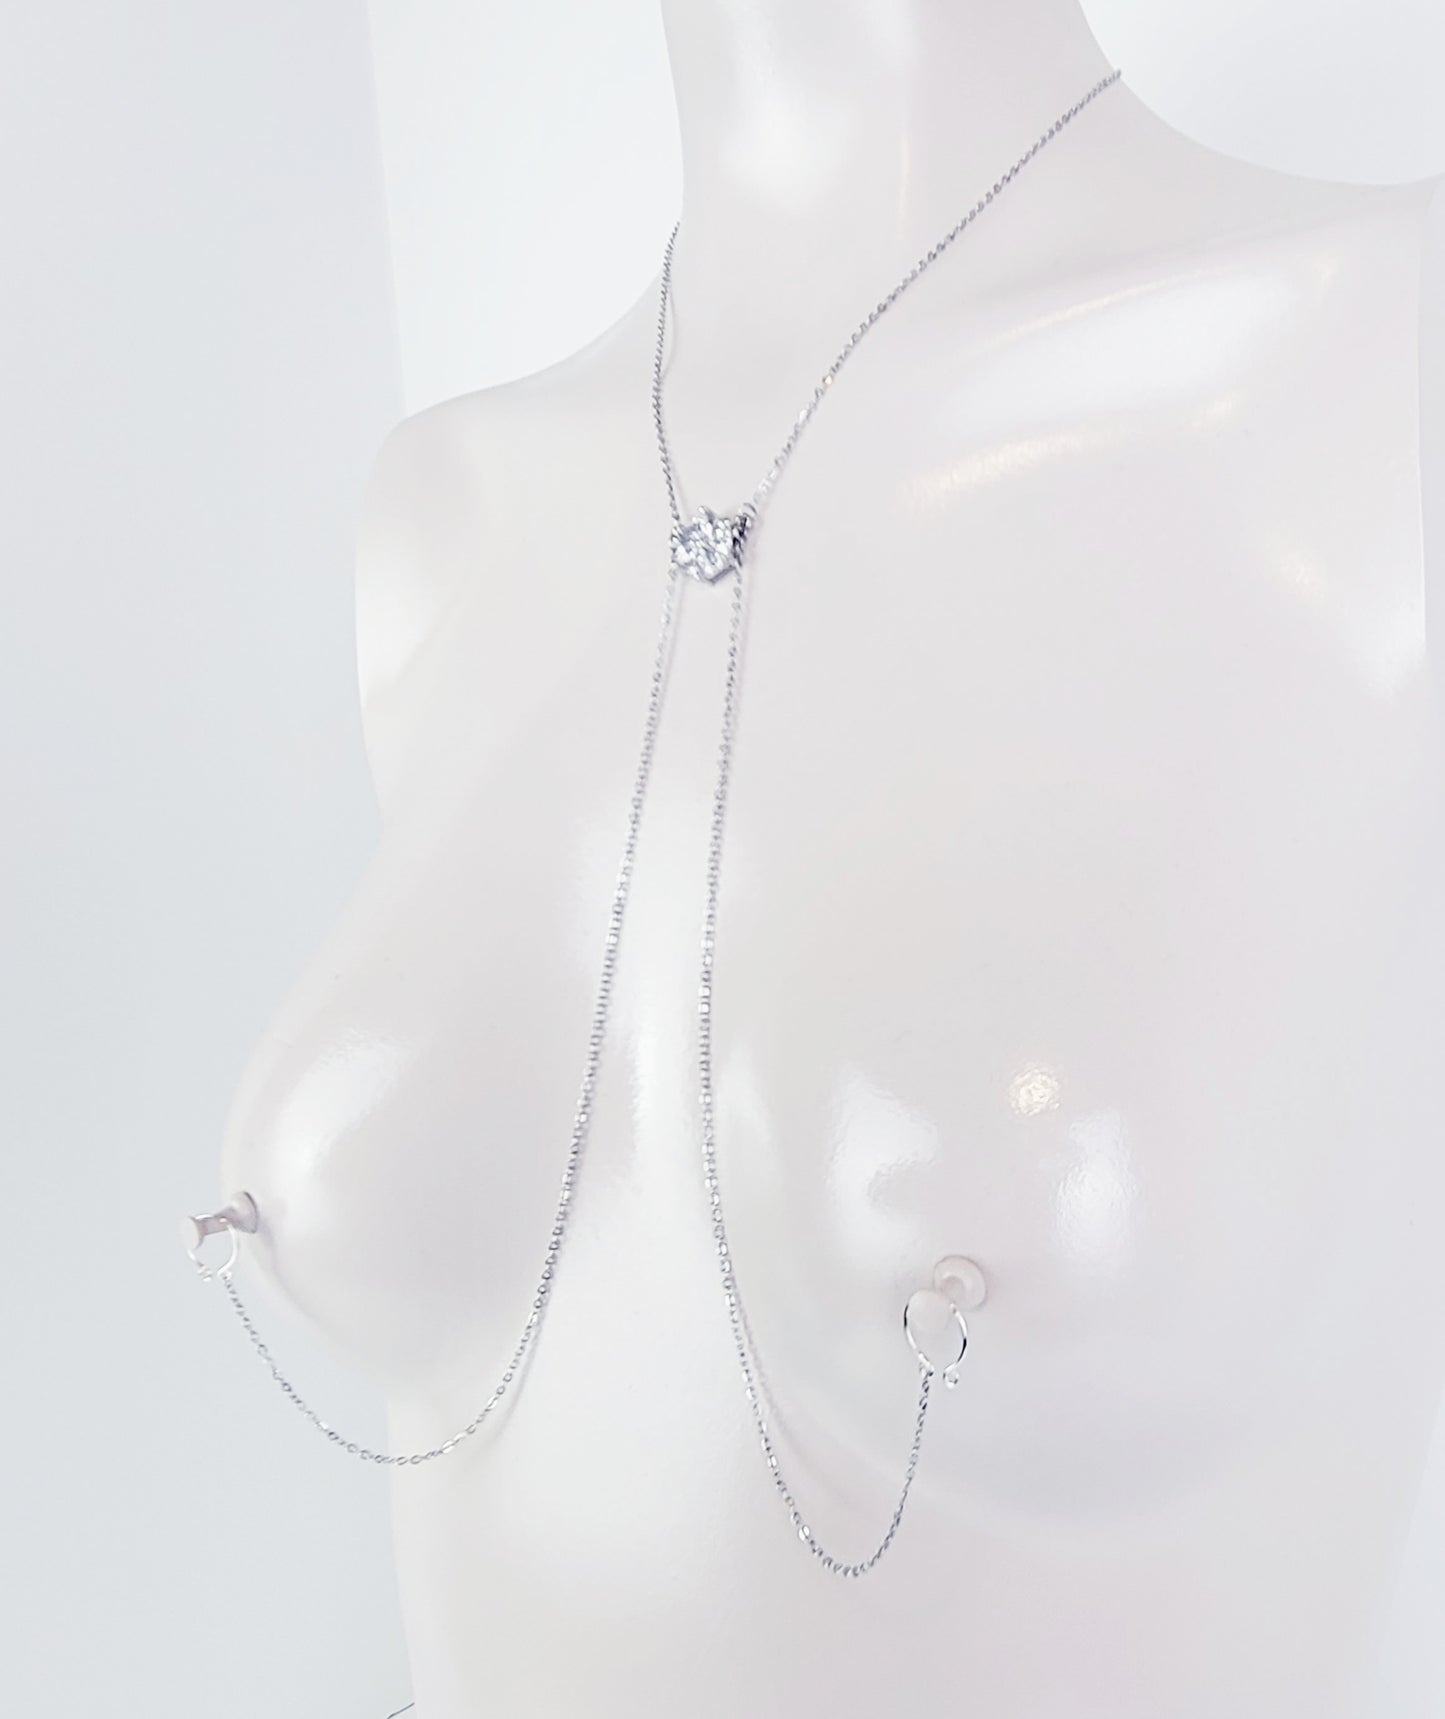 Stainless Steel Necklace to Nipple with Cubic Zirconia Pendant. Non-Piercing or with Pierced Nipples. BDSM Nipple Clamp Option.